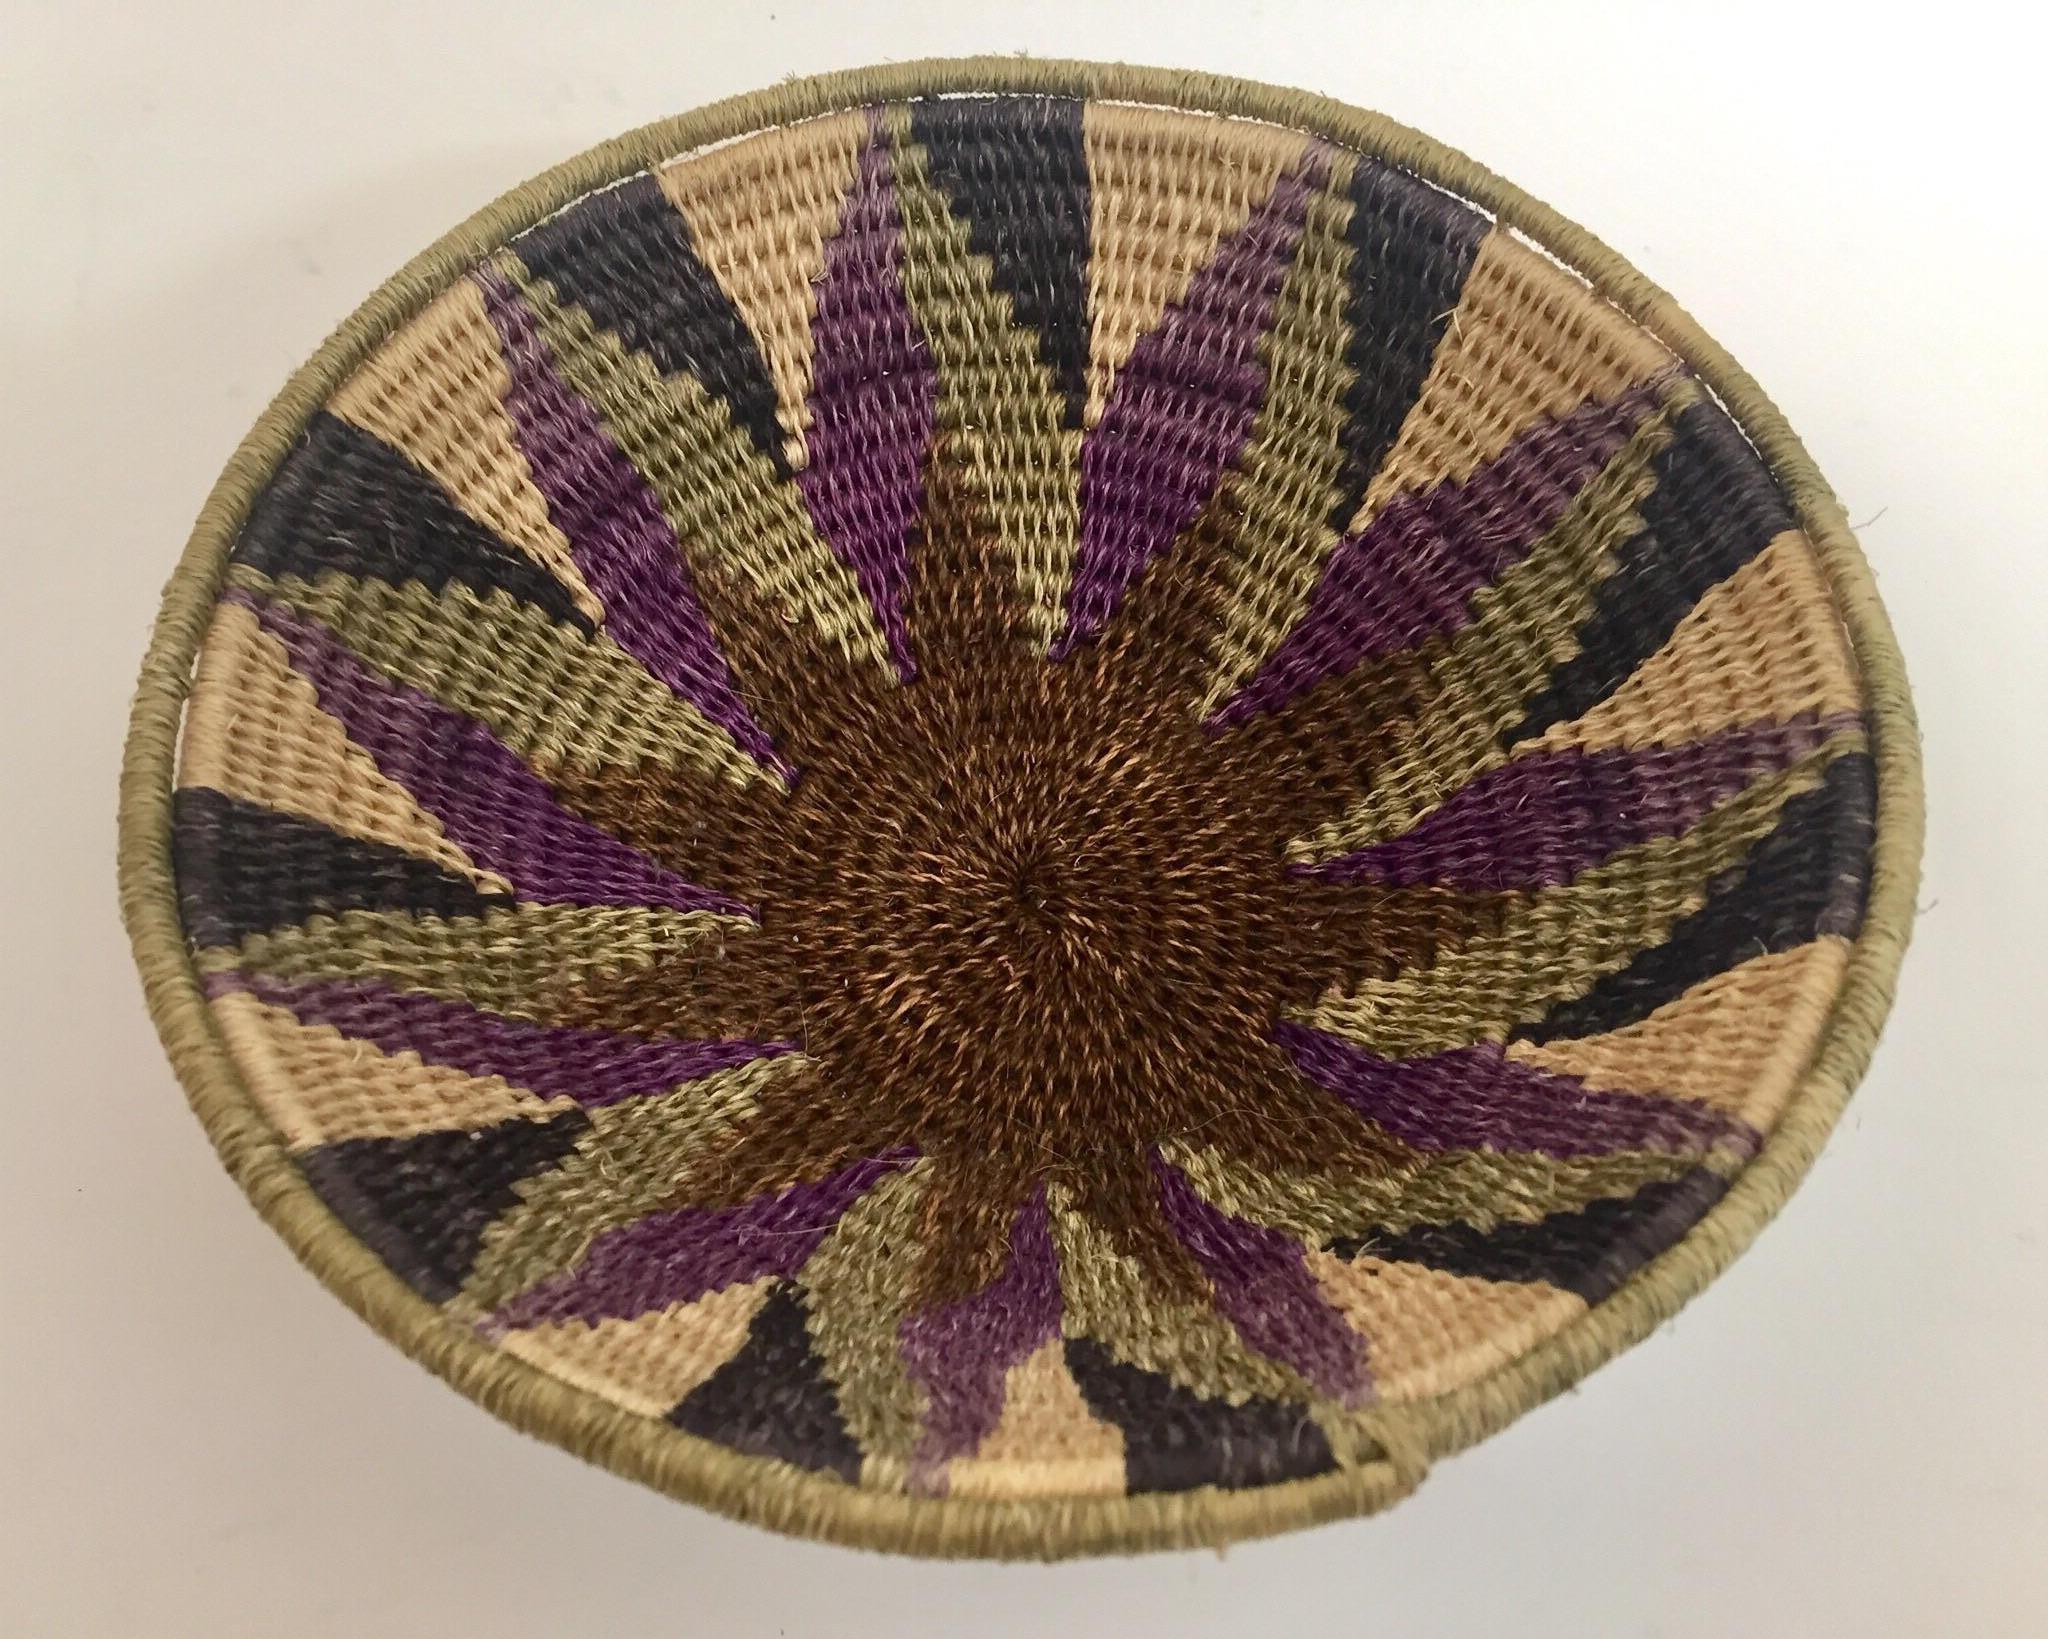 Hand-Woven African Polychrome Seagrass and Silk Woven Basket